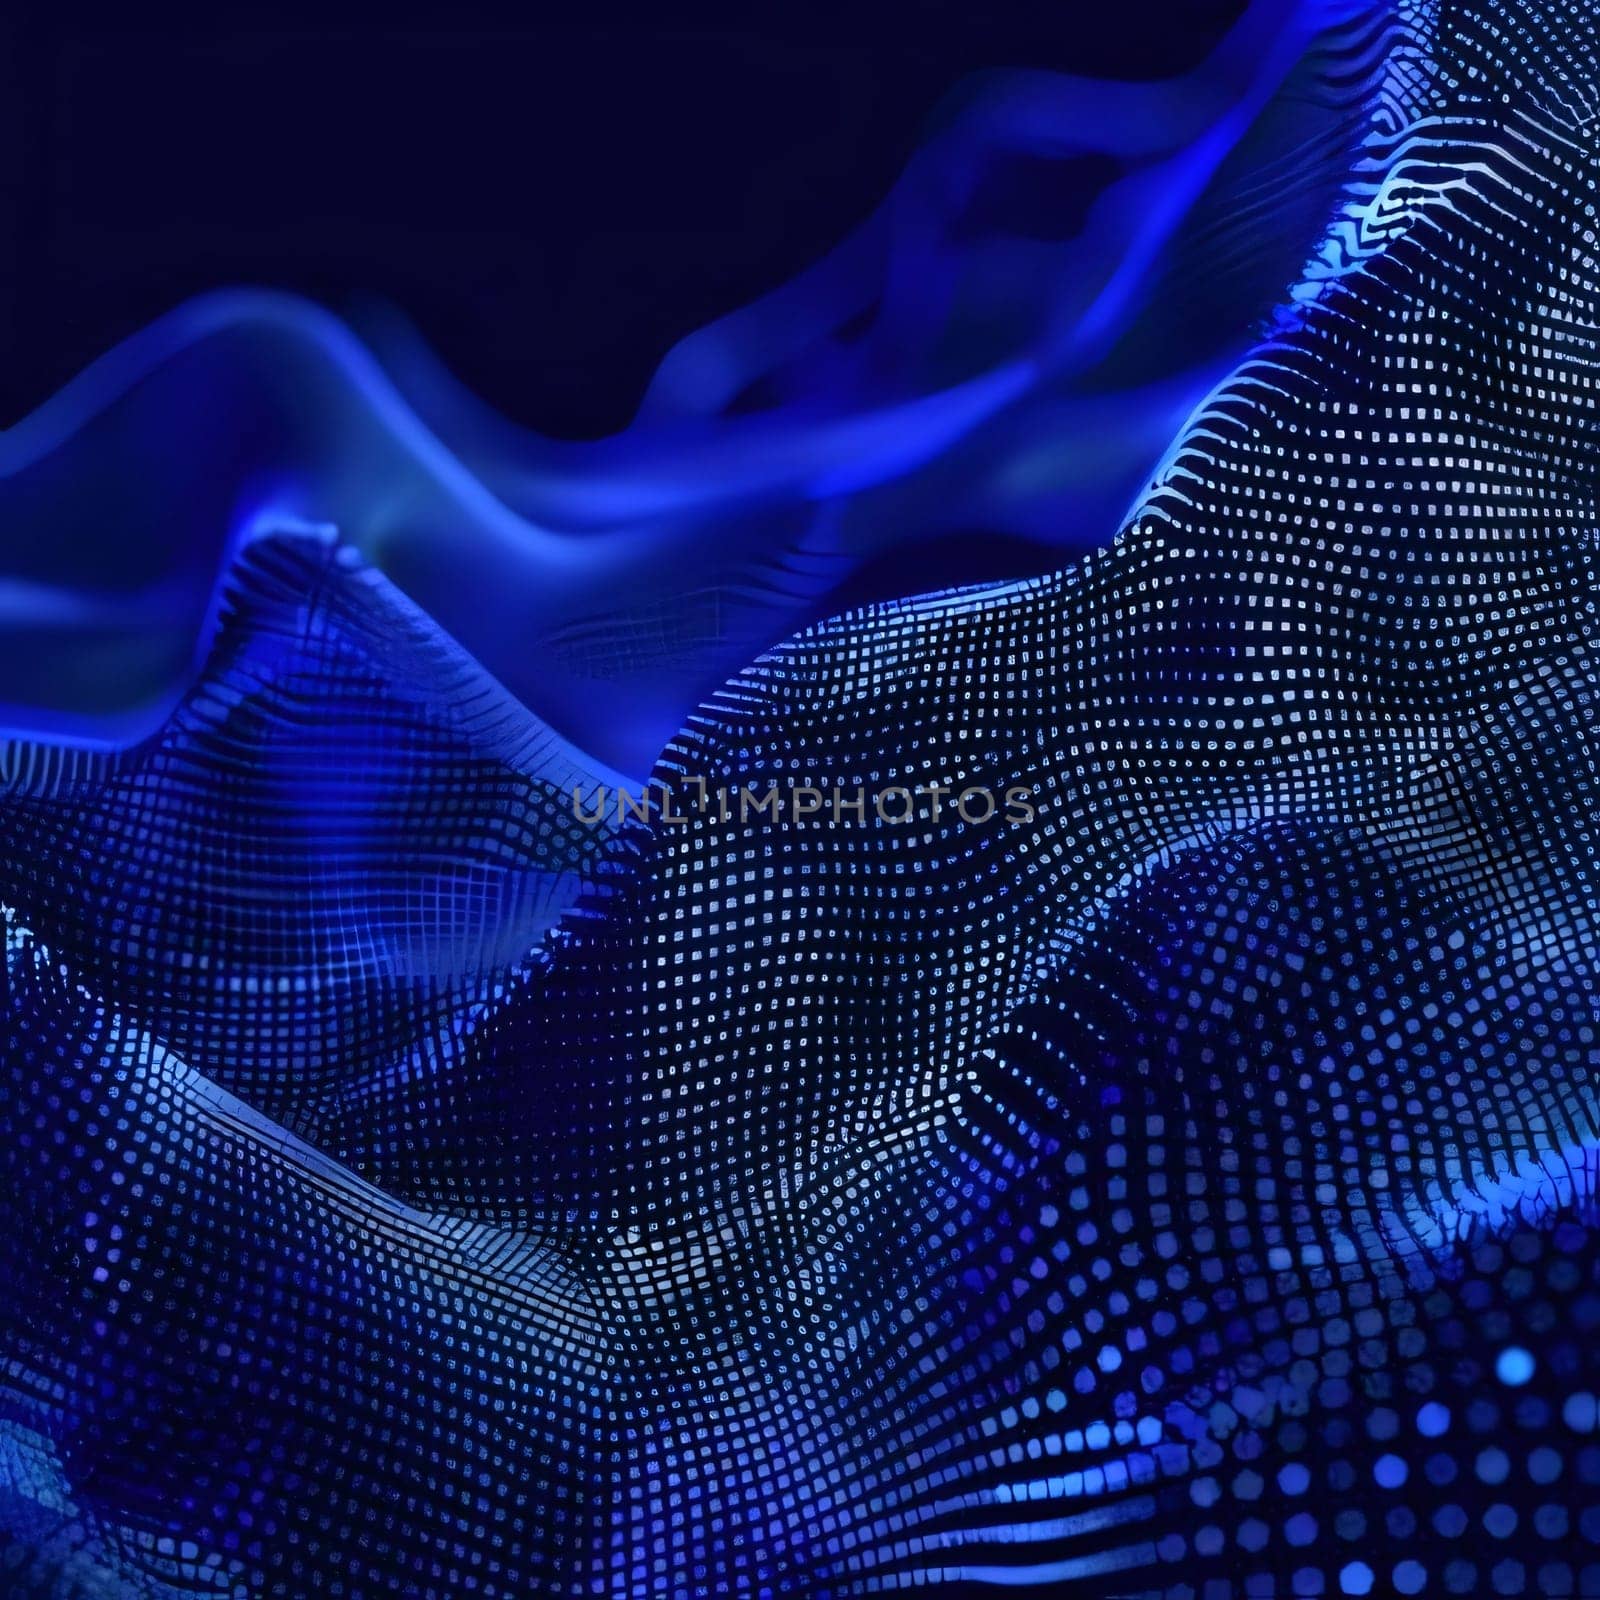 Abstract background design: Abstract digital wave with particles. 3d illustration. Technology background.